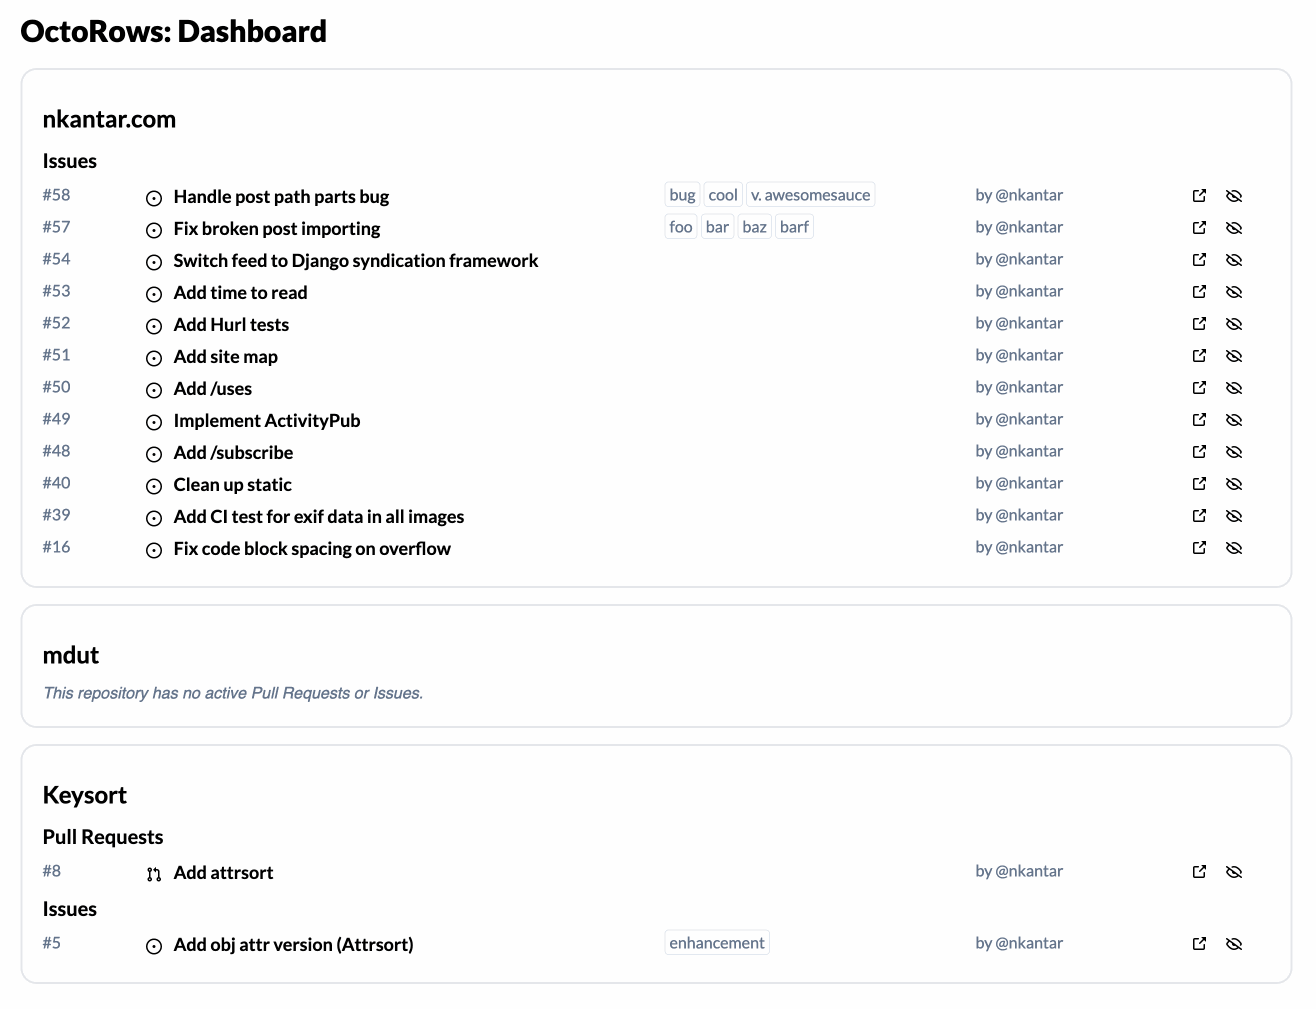 Animated GIF of a table-like UI resembling GitHub projects with some repos, issues, and PRs, and the author clicking on a “hide” icon causing them to disappear